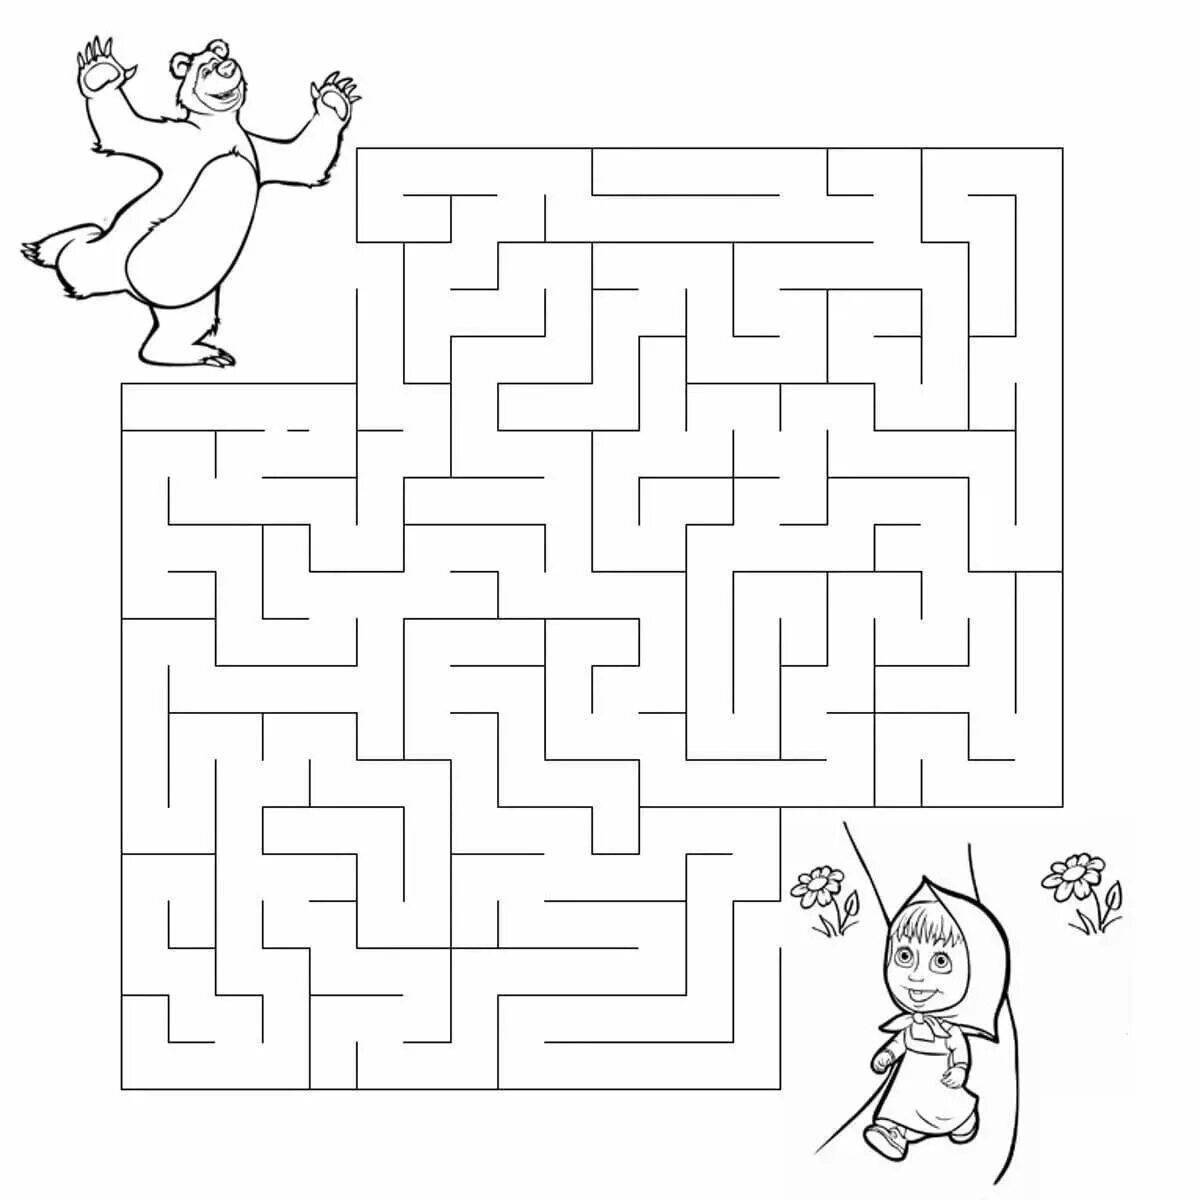 Fabulous maze coloring for children 7 years old